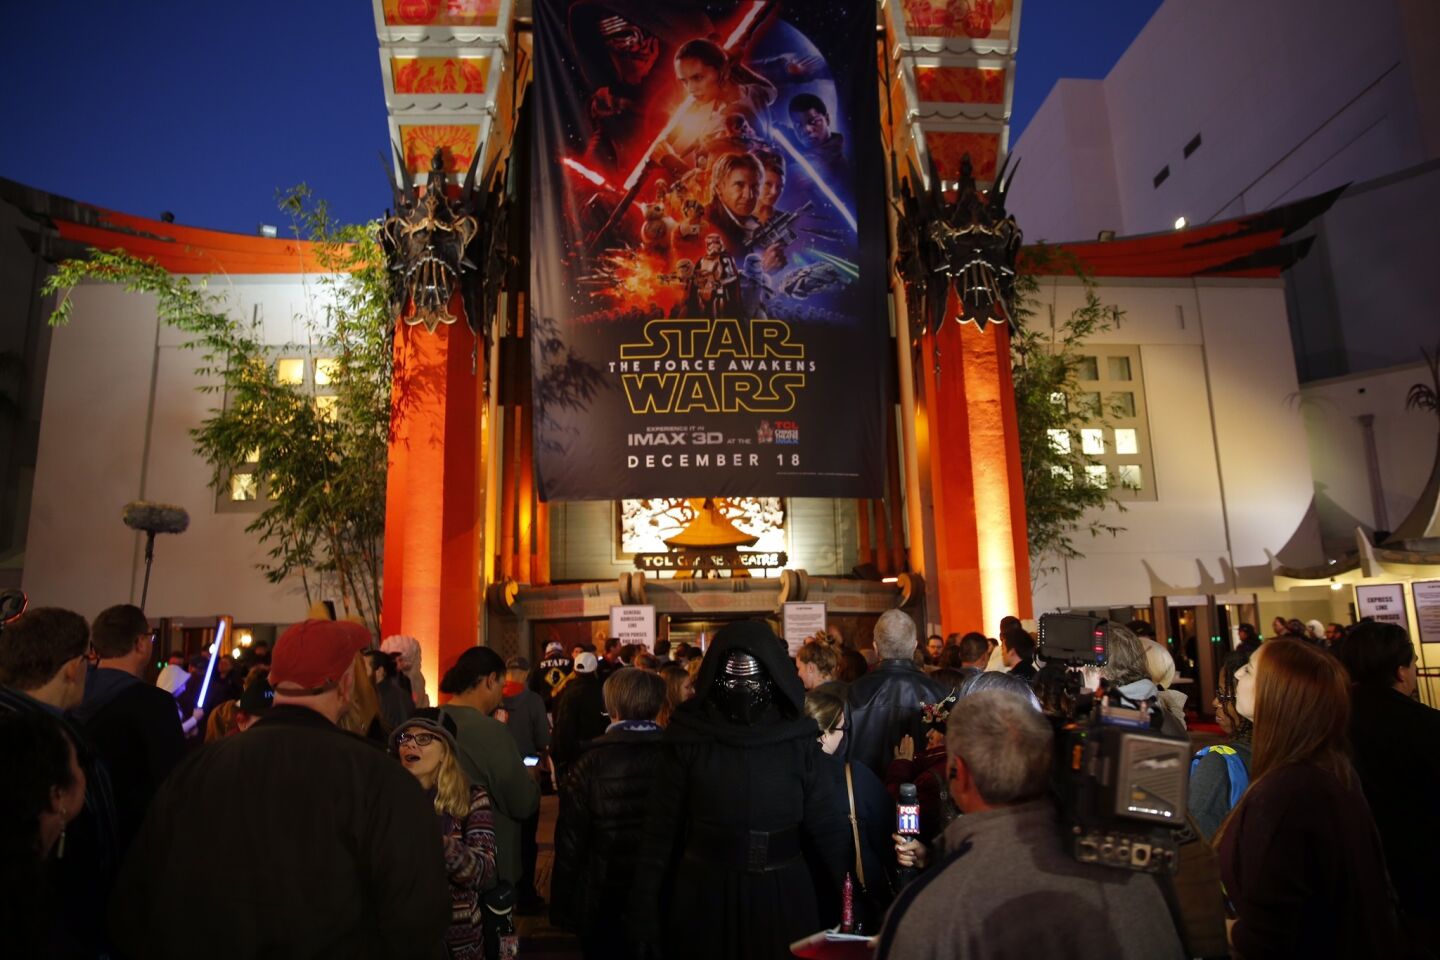 Fans line up outside the theater.